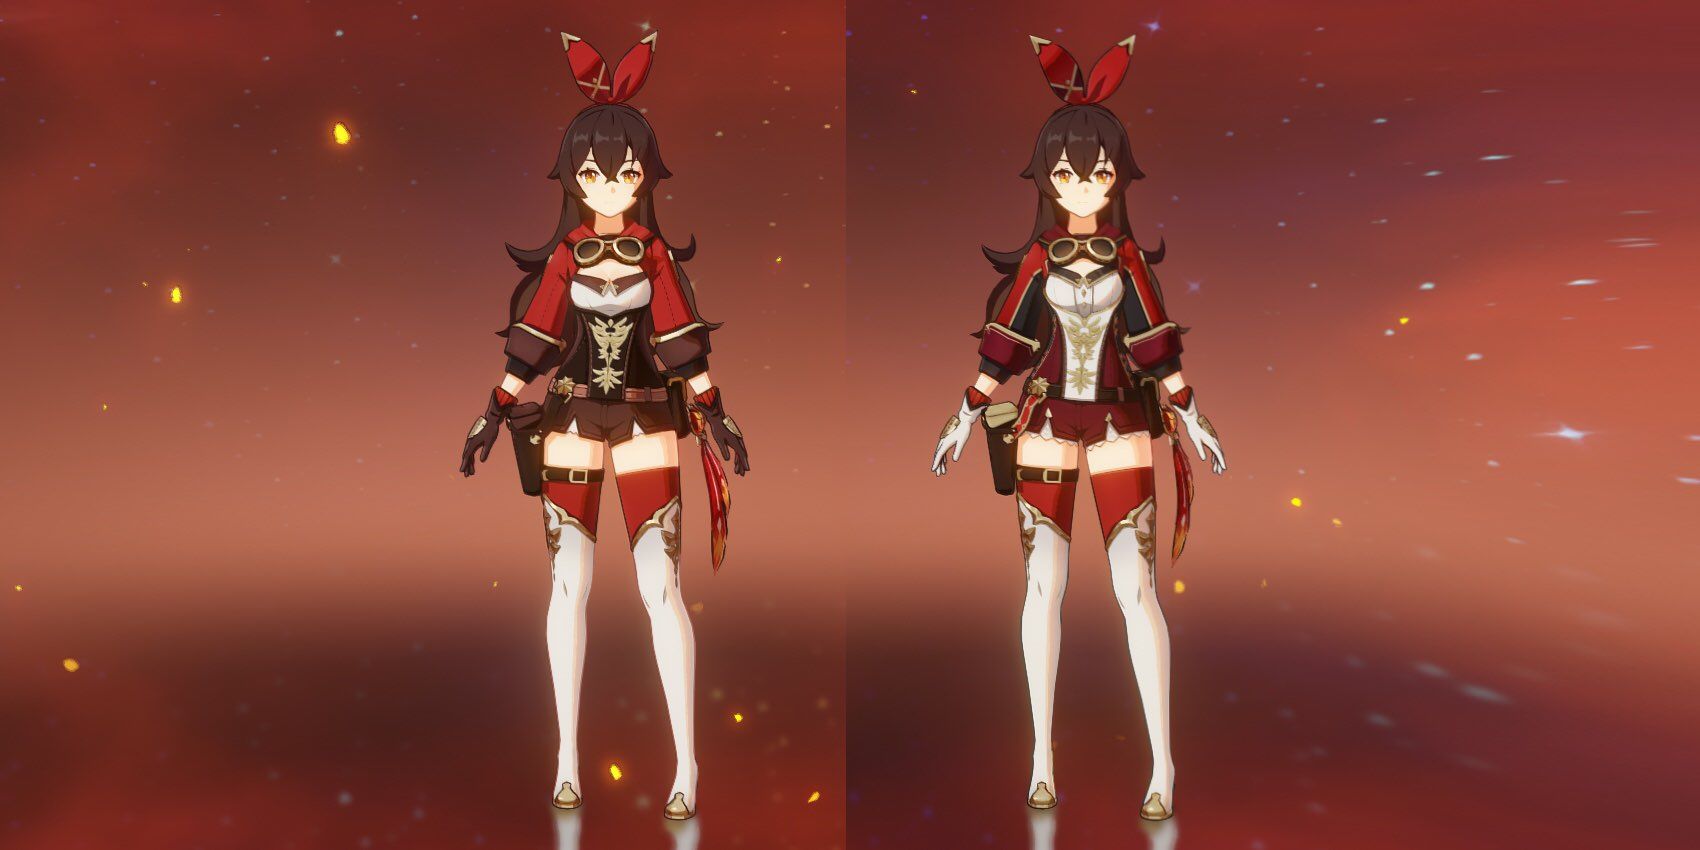 How Genshin Impacts New Alternate Outfits Compare To The Old Ones